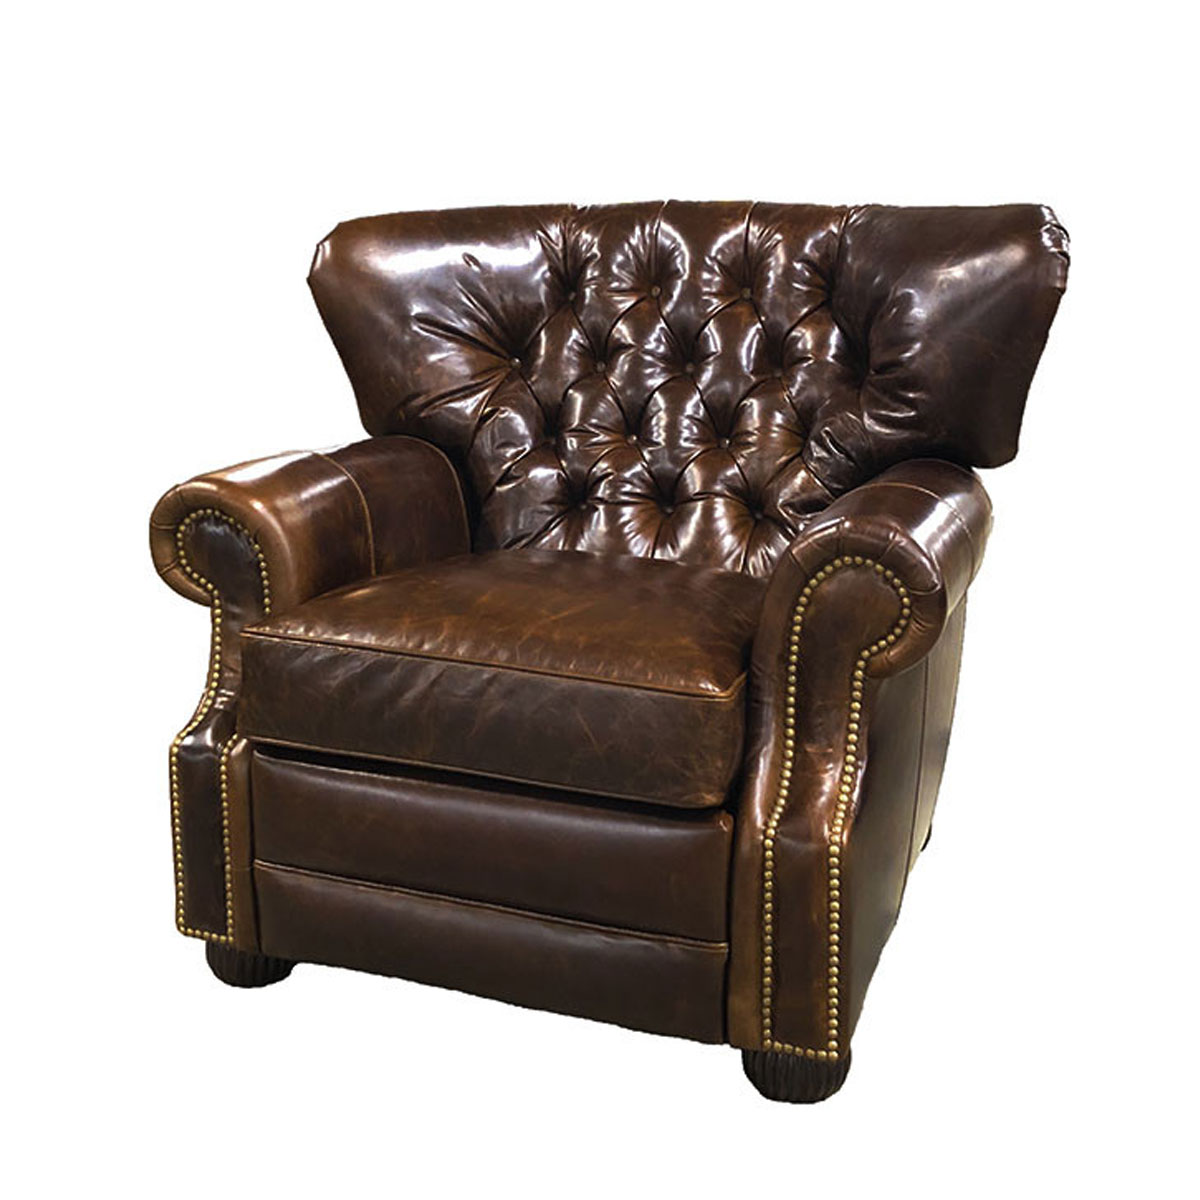 200 Augusta Recliner by CC Leather